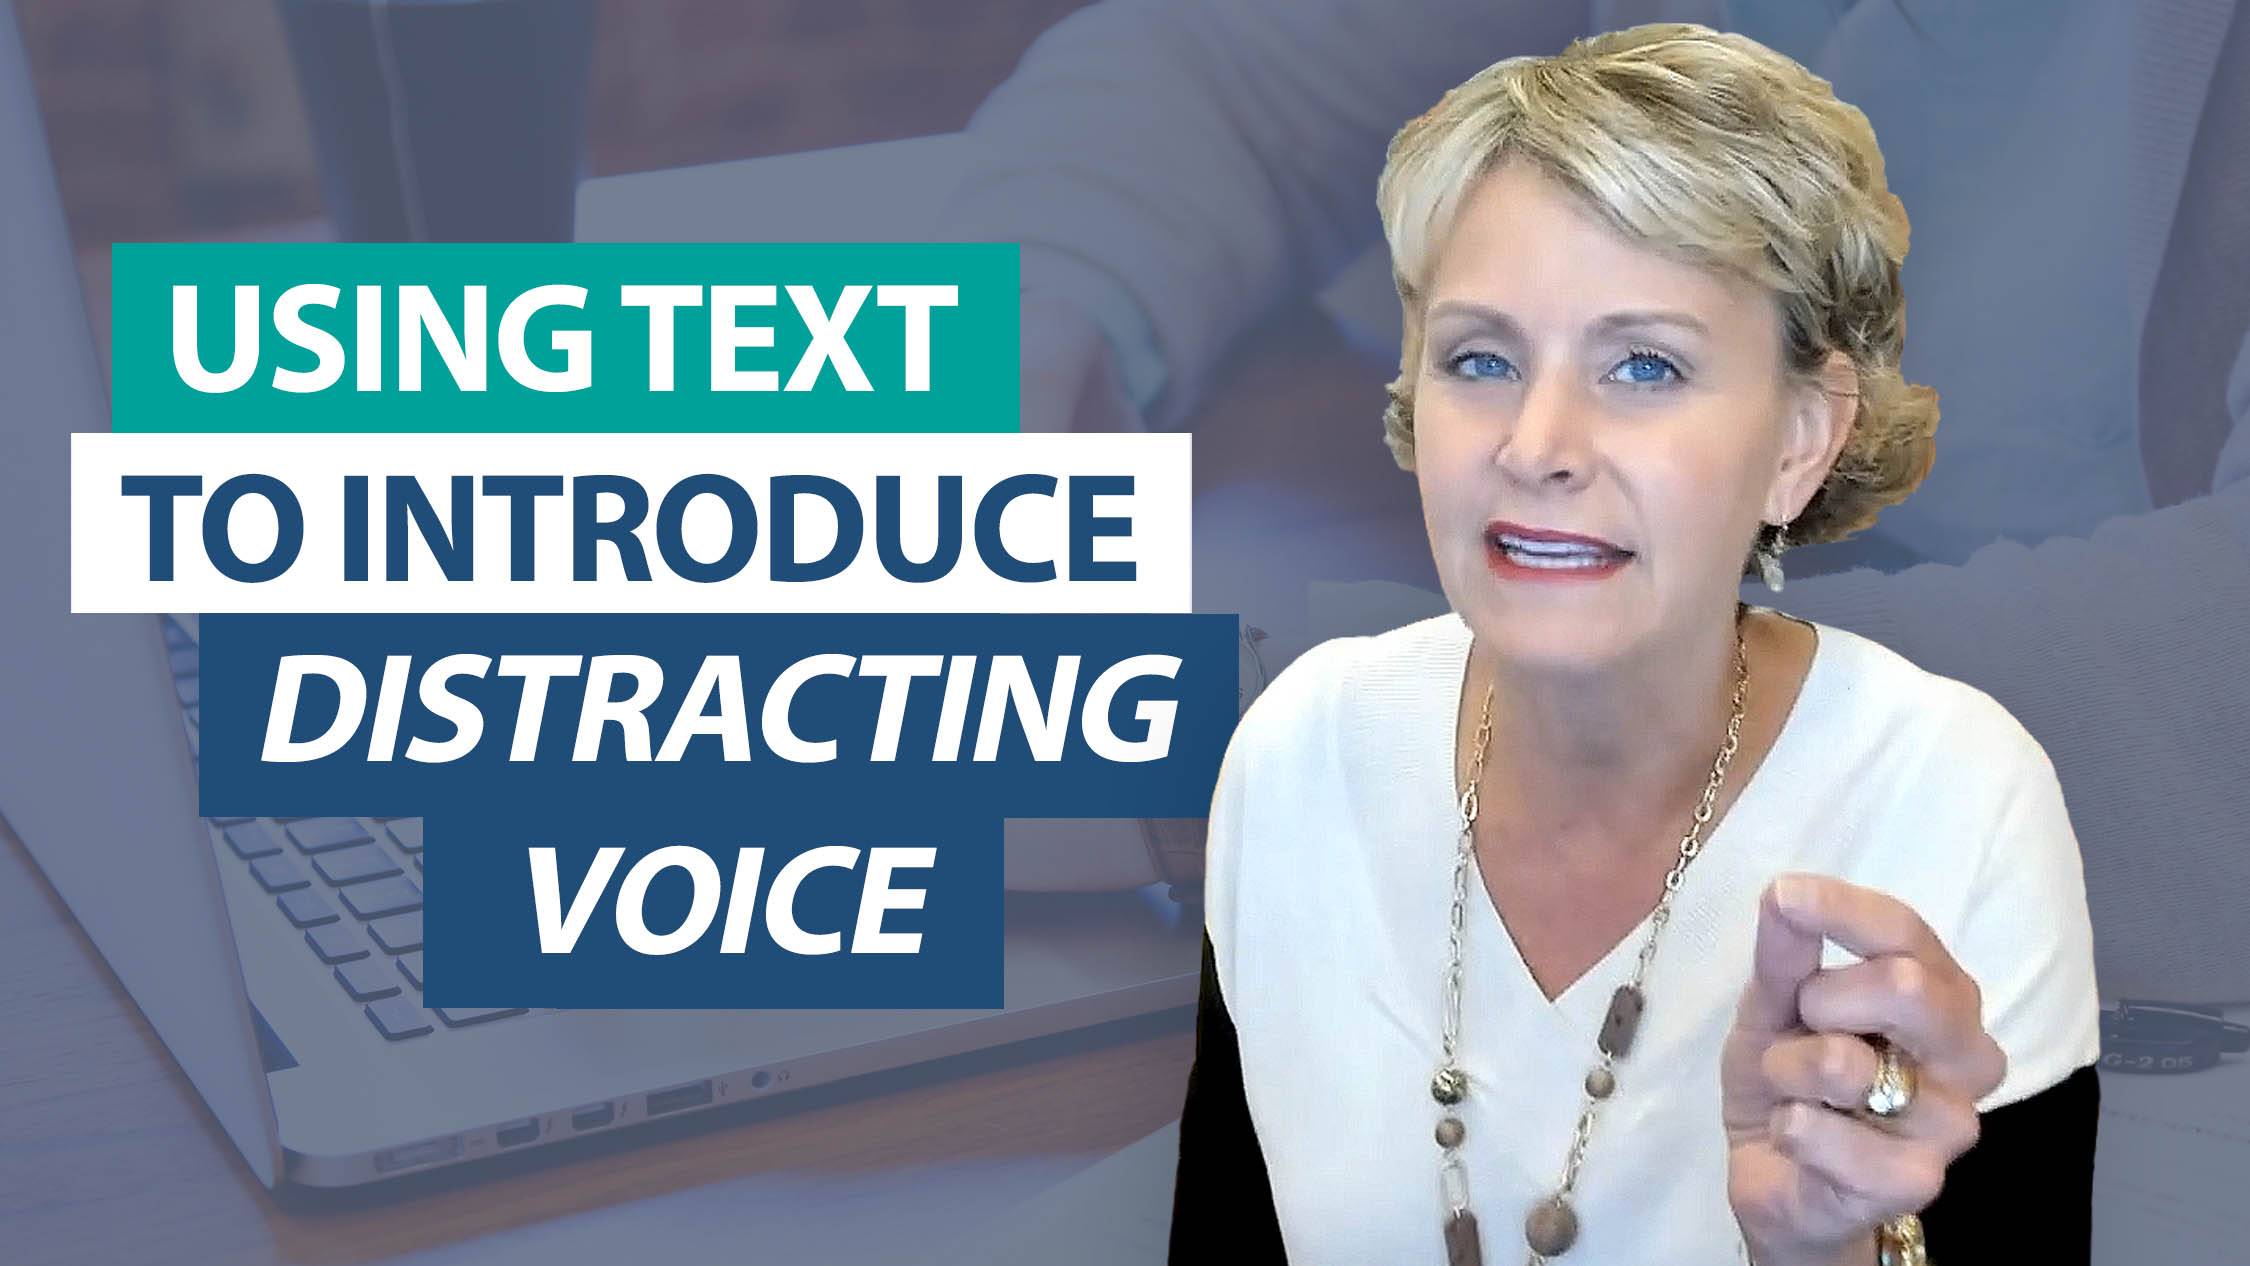 Use text to model the <em>Distracting Voice</em>